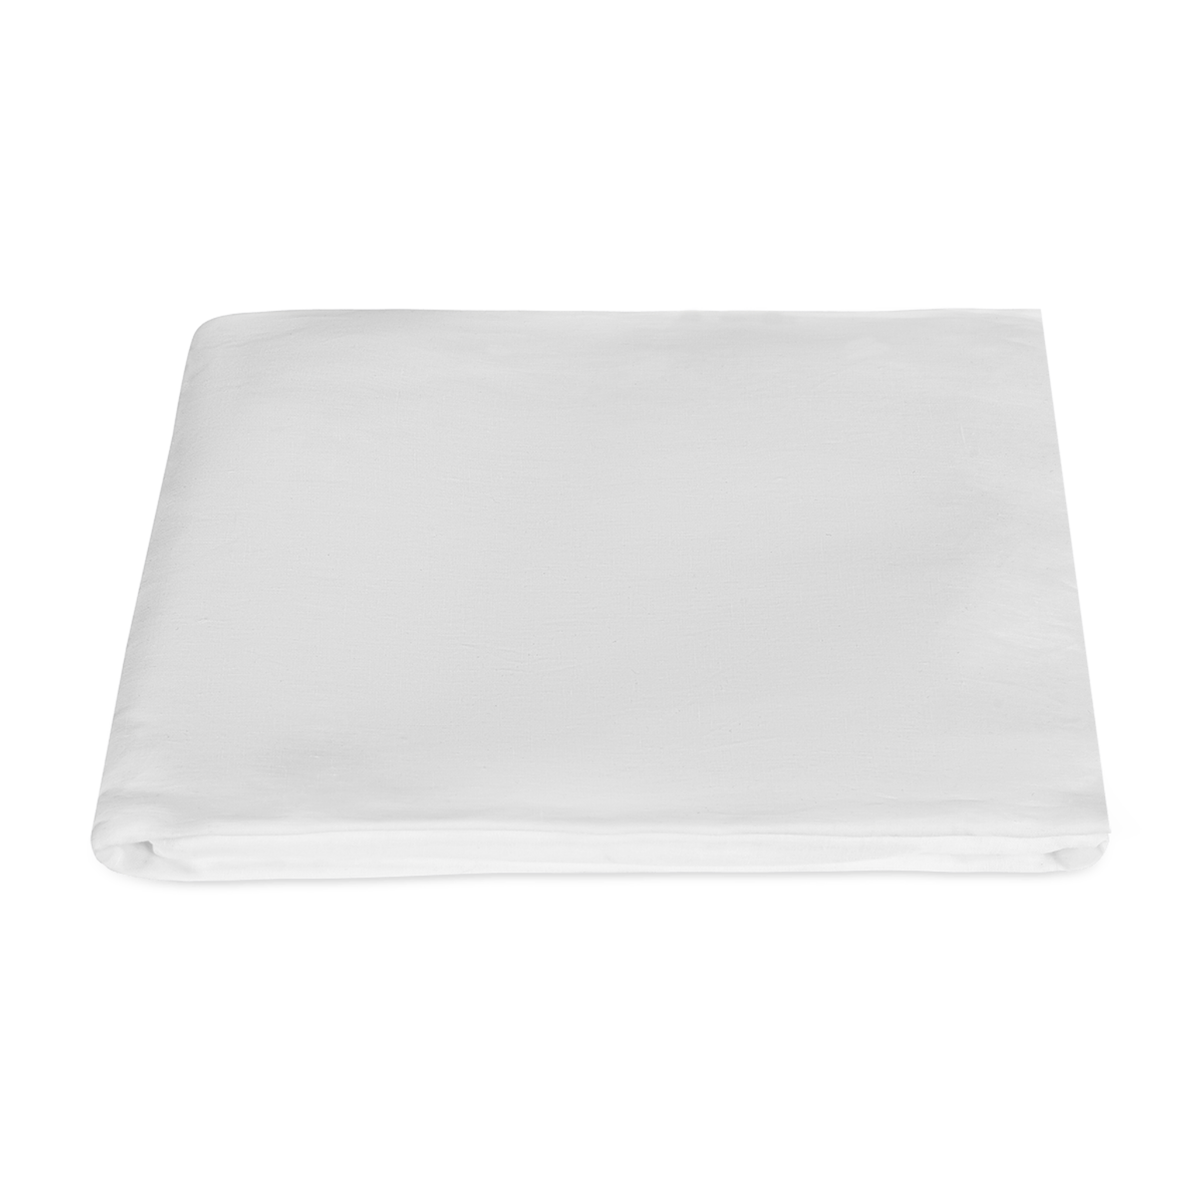 Folded Fitted Sheet of Matouk Roman Hemstitch Bedding Color White